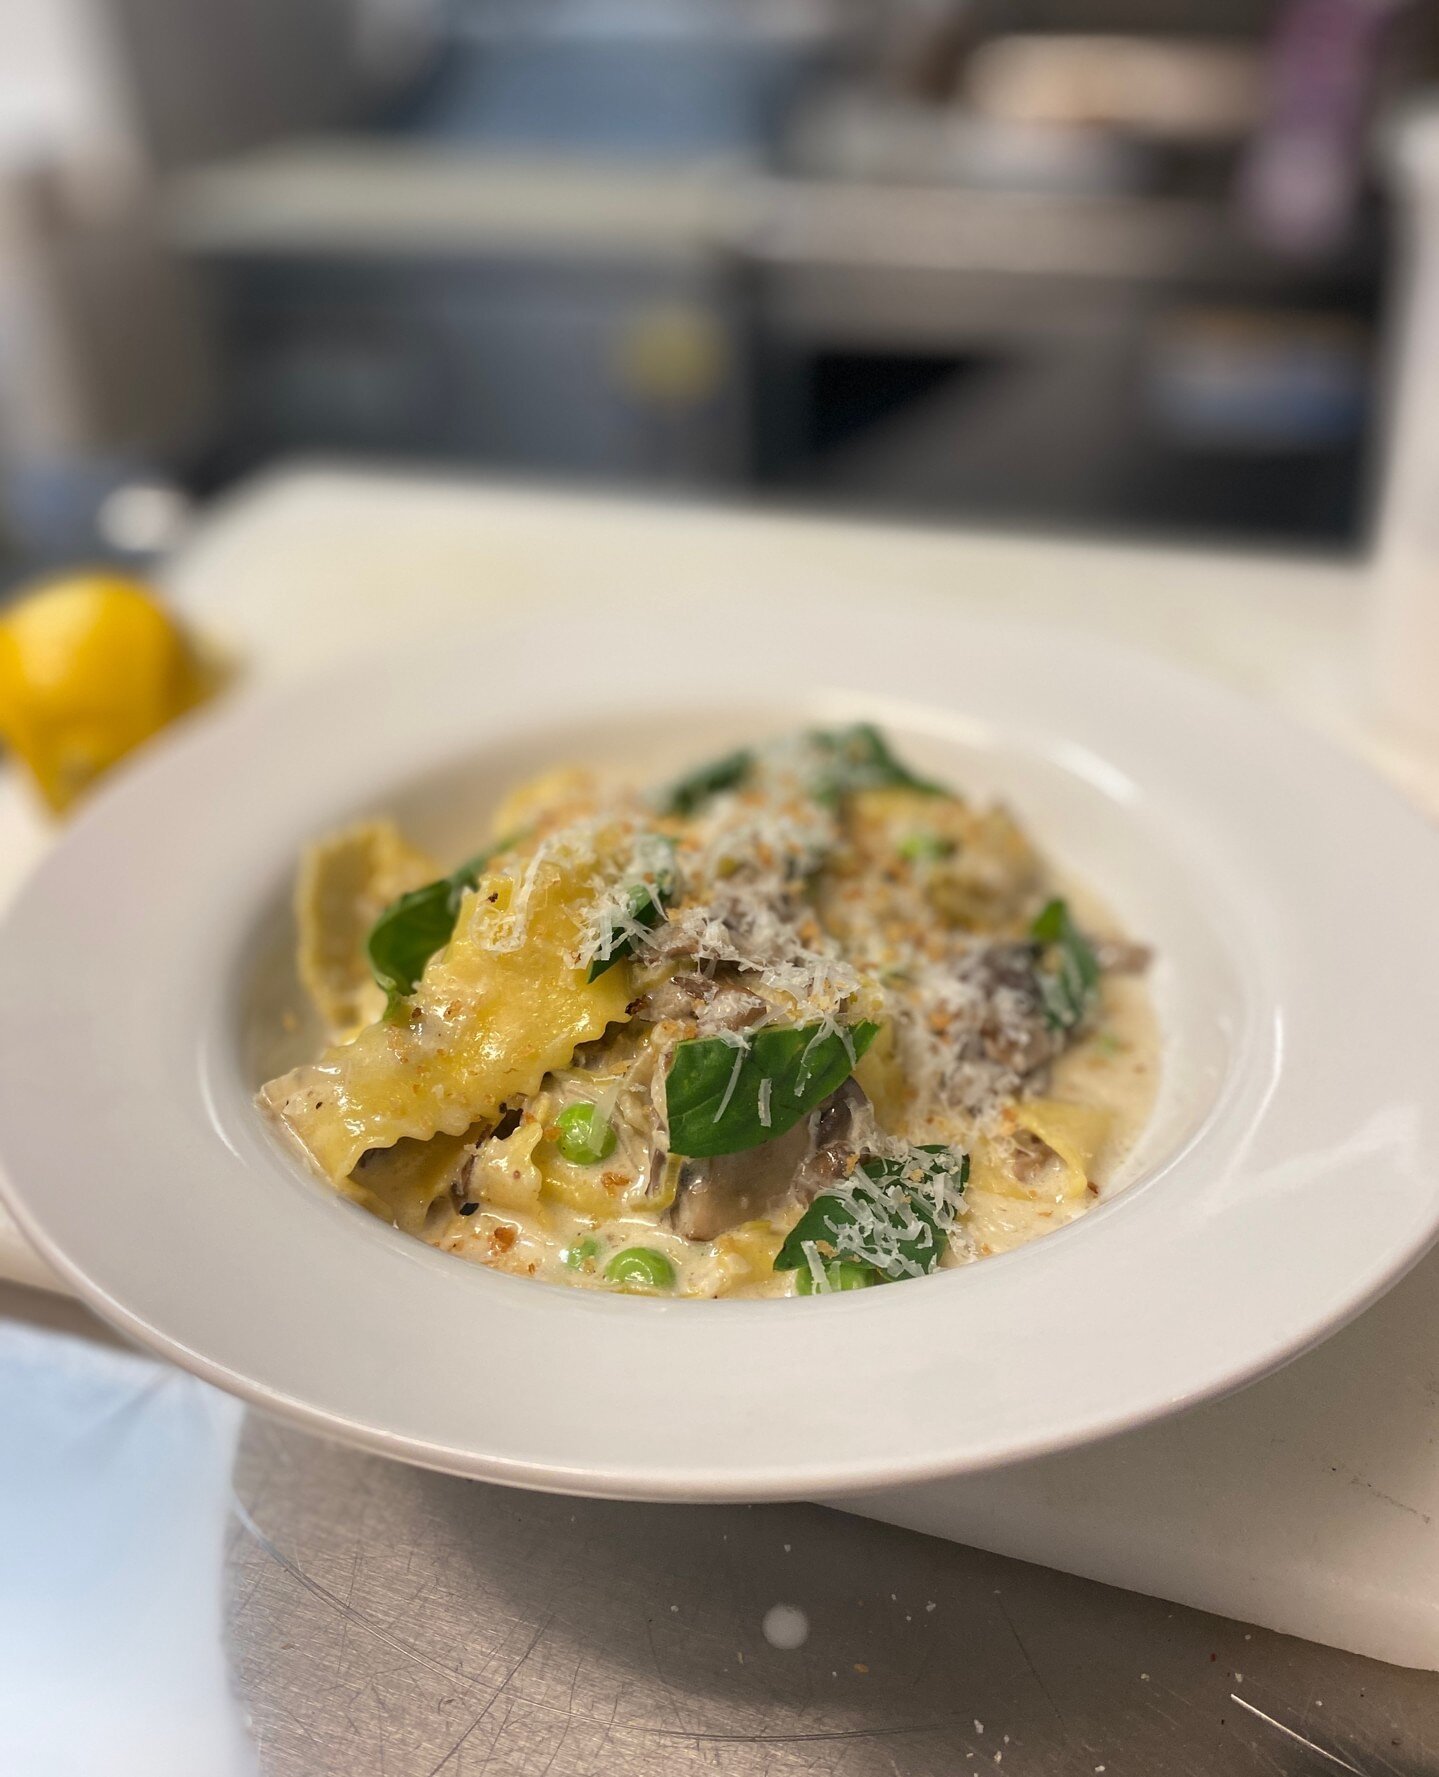 The Federal ALWAYS makes the pasta in-house! This creamy pappardelle is served with fresh spring peas. Our mouths are watering over here 🤤